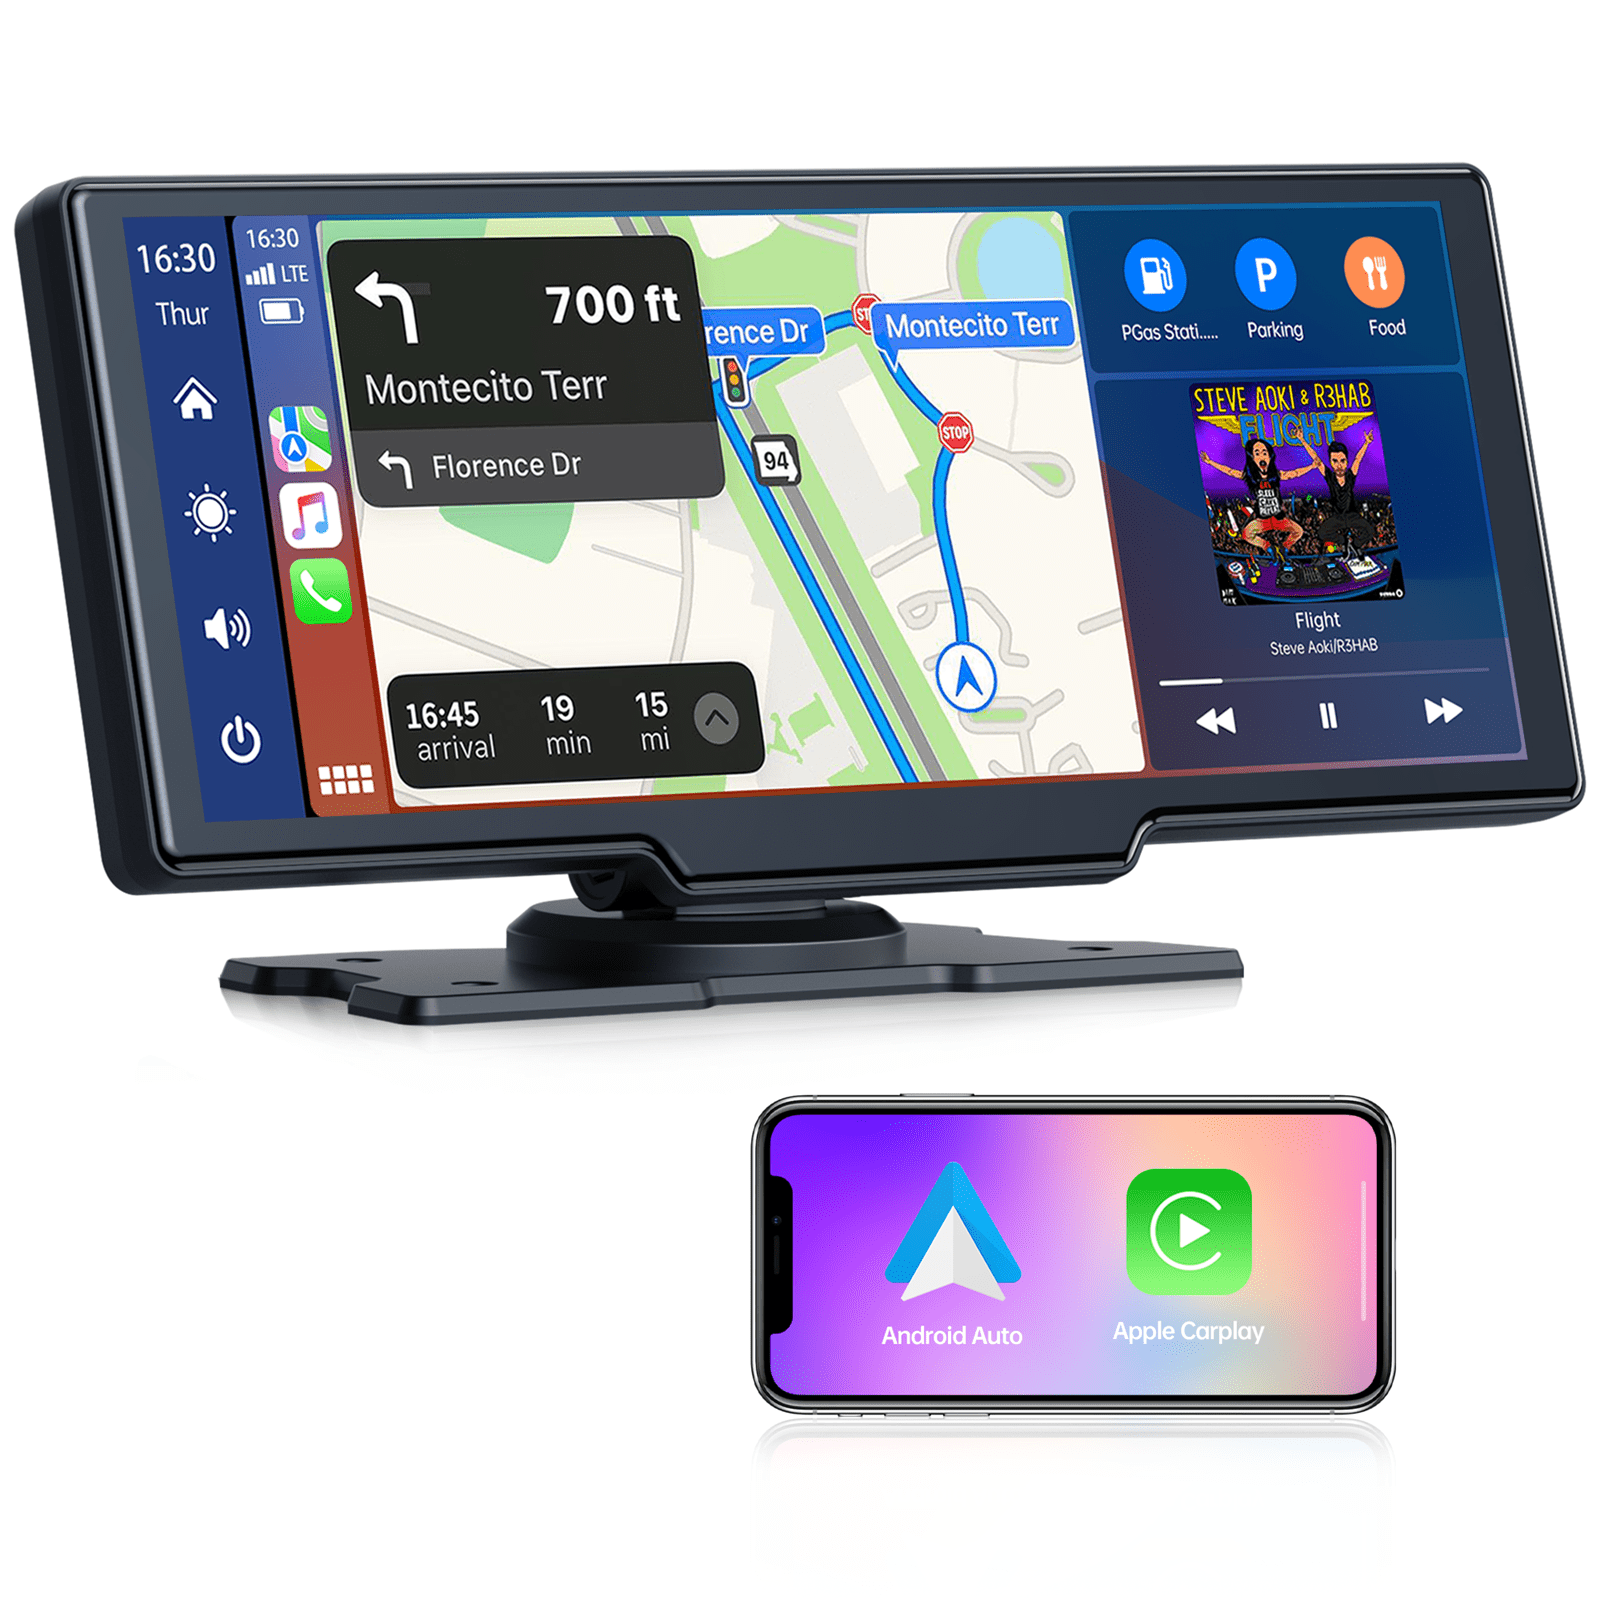 Touchscreen Car Stereo for Apple Wireless Carplay Android Auto, 9.26 Inch  GPS Navigation for Car, Car Audio Radio Receiver with Voice Control,  Bluetooth, GPS, Siri Assistant,Multimedia Player 